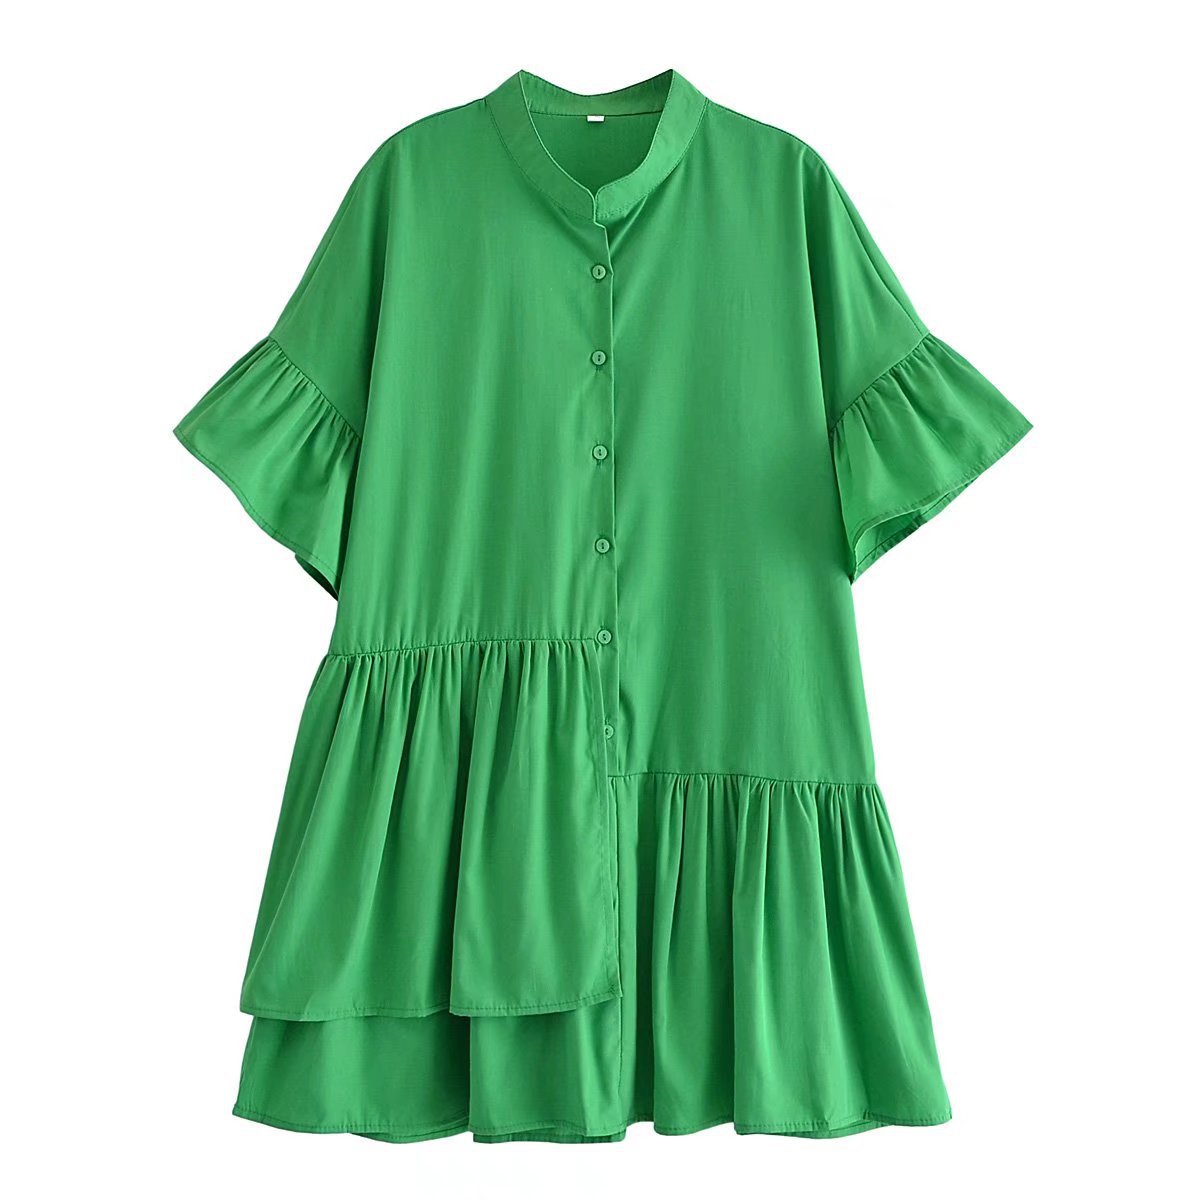 Women's New Solid Green Layered Dress